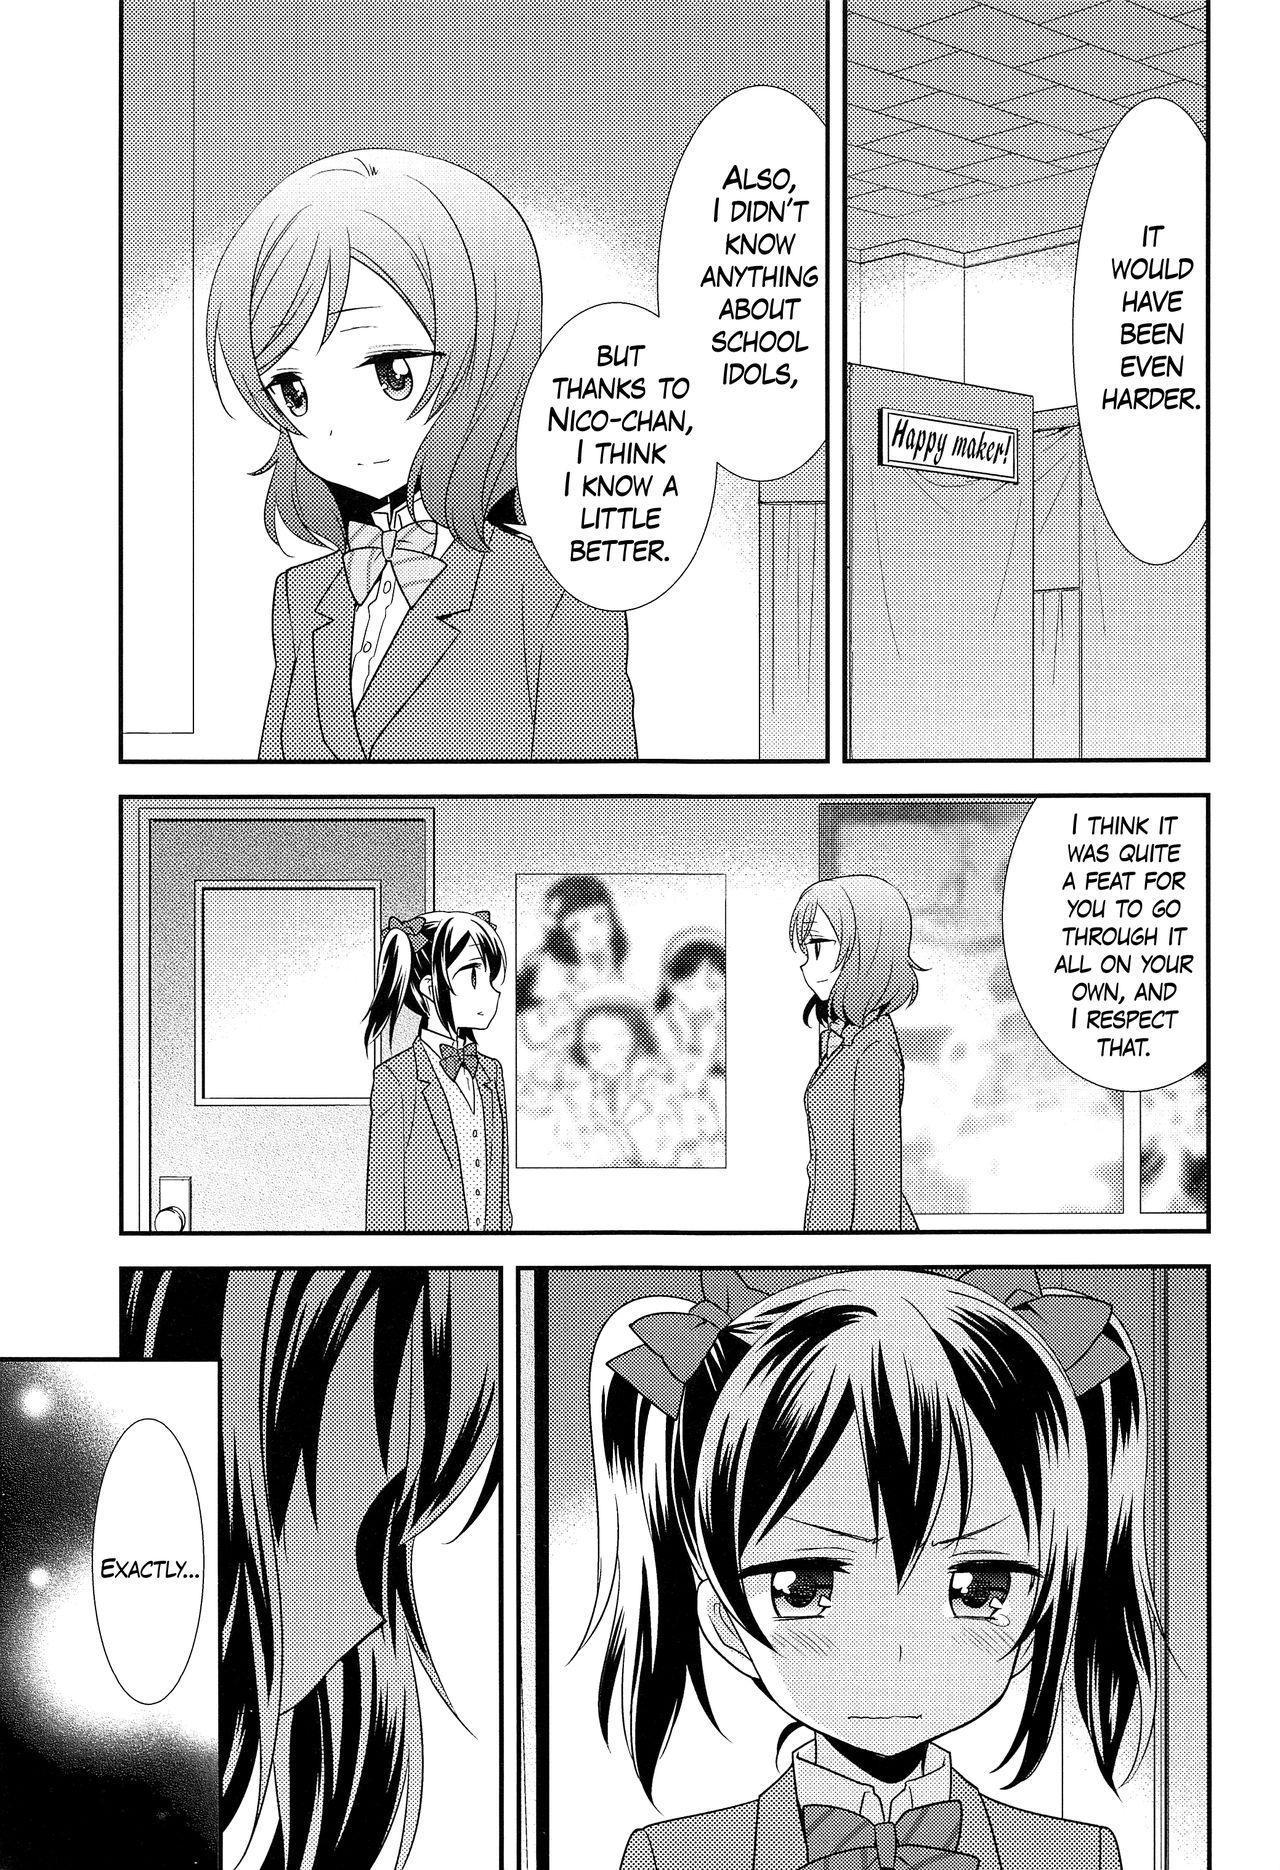 Old And Young Bokura no Te ni wa Ai Shika nai. | There’s Nothing but Love In Our Hands. - Love live Bigbooty - Page 13